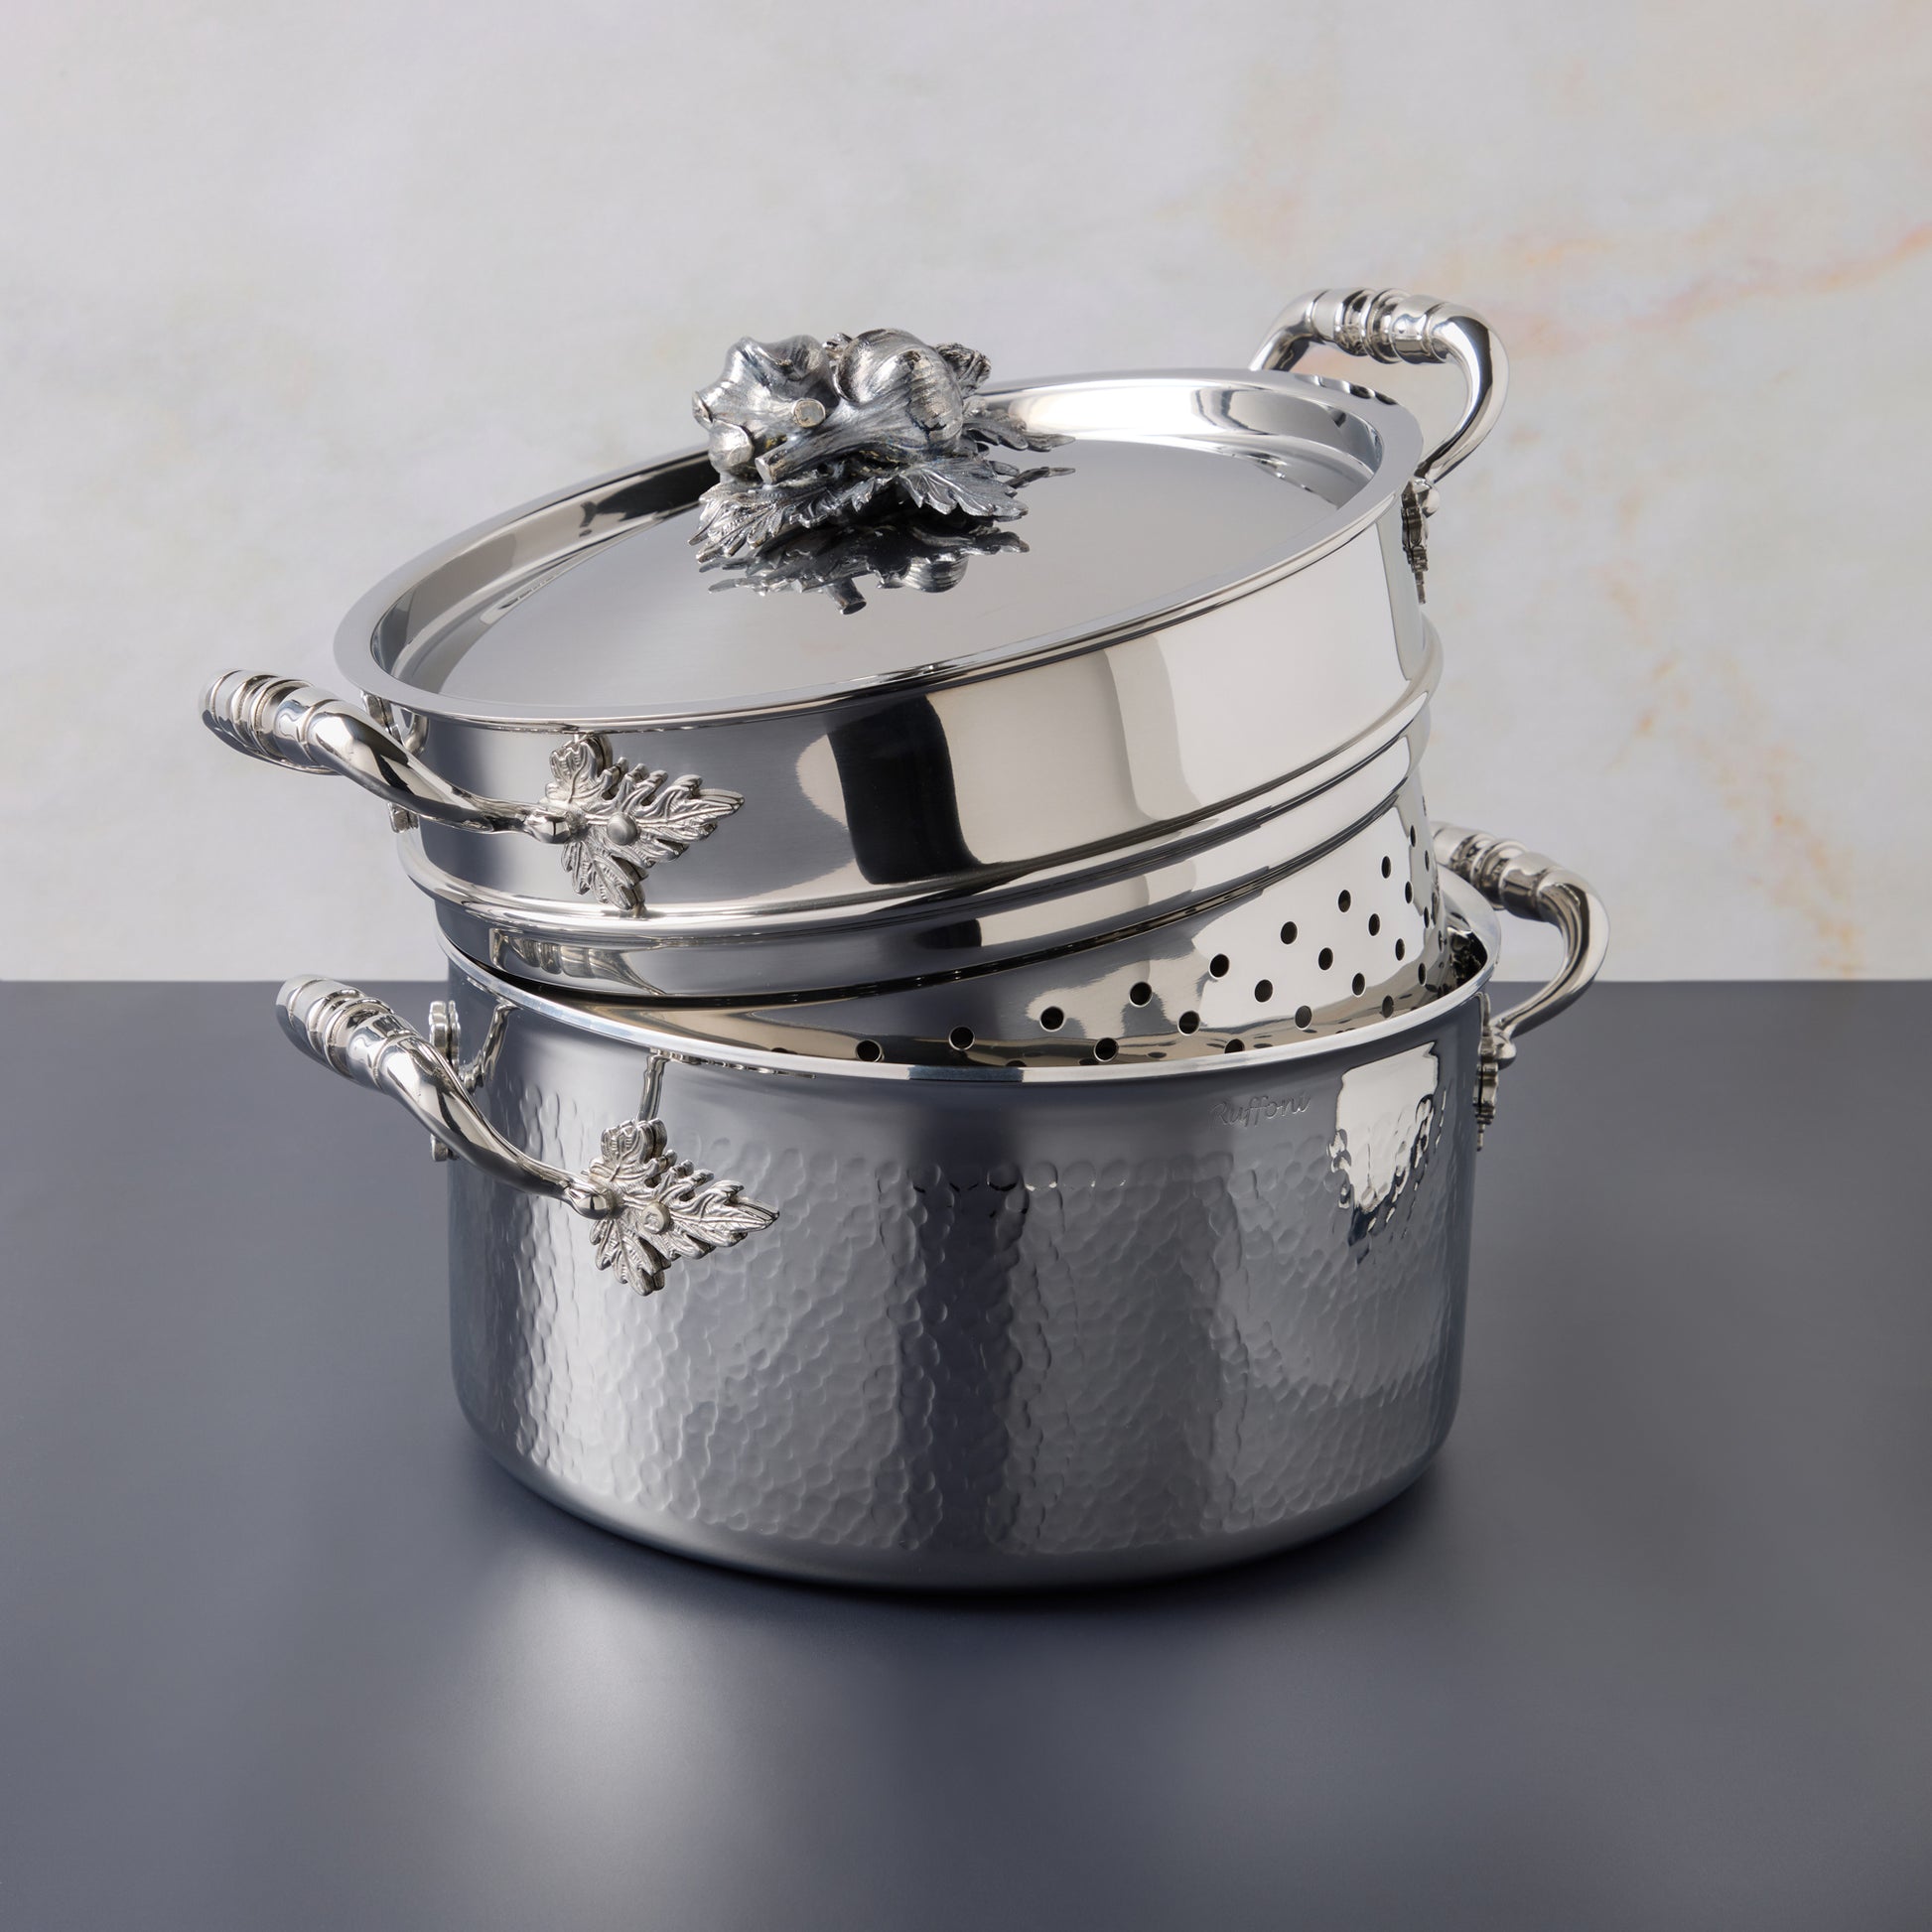 Ruffoni Stainless Steel pasta insert with the matching Opus Prima 6qt Stockpot